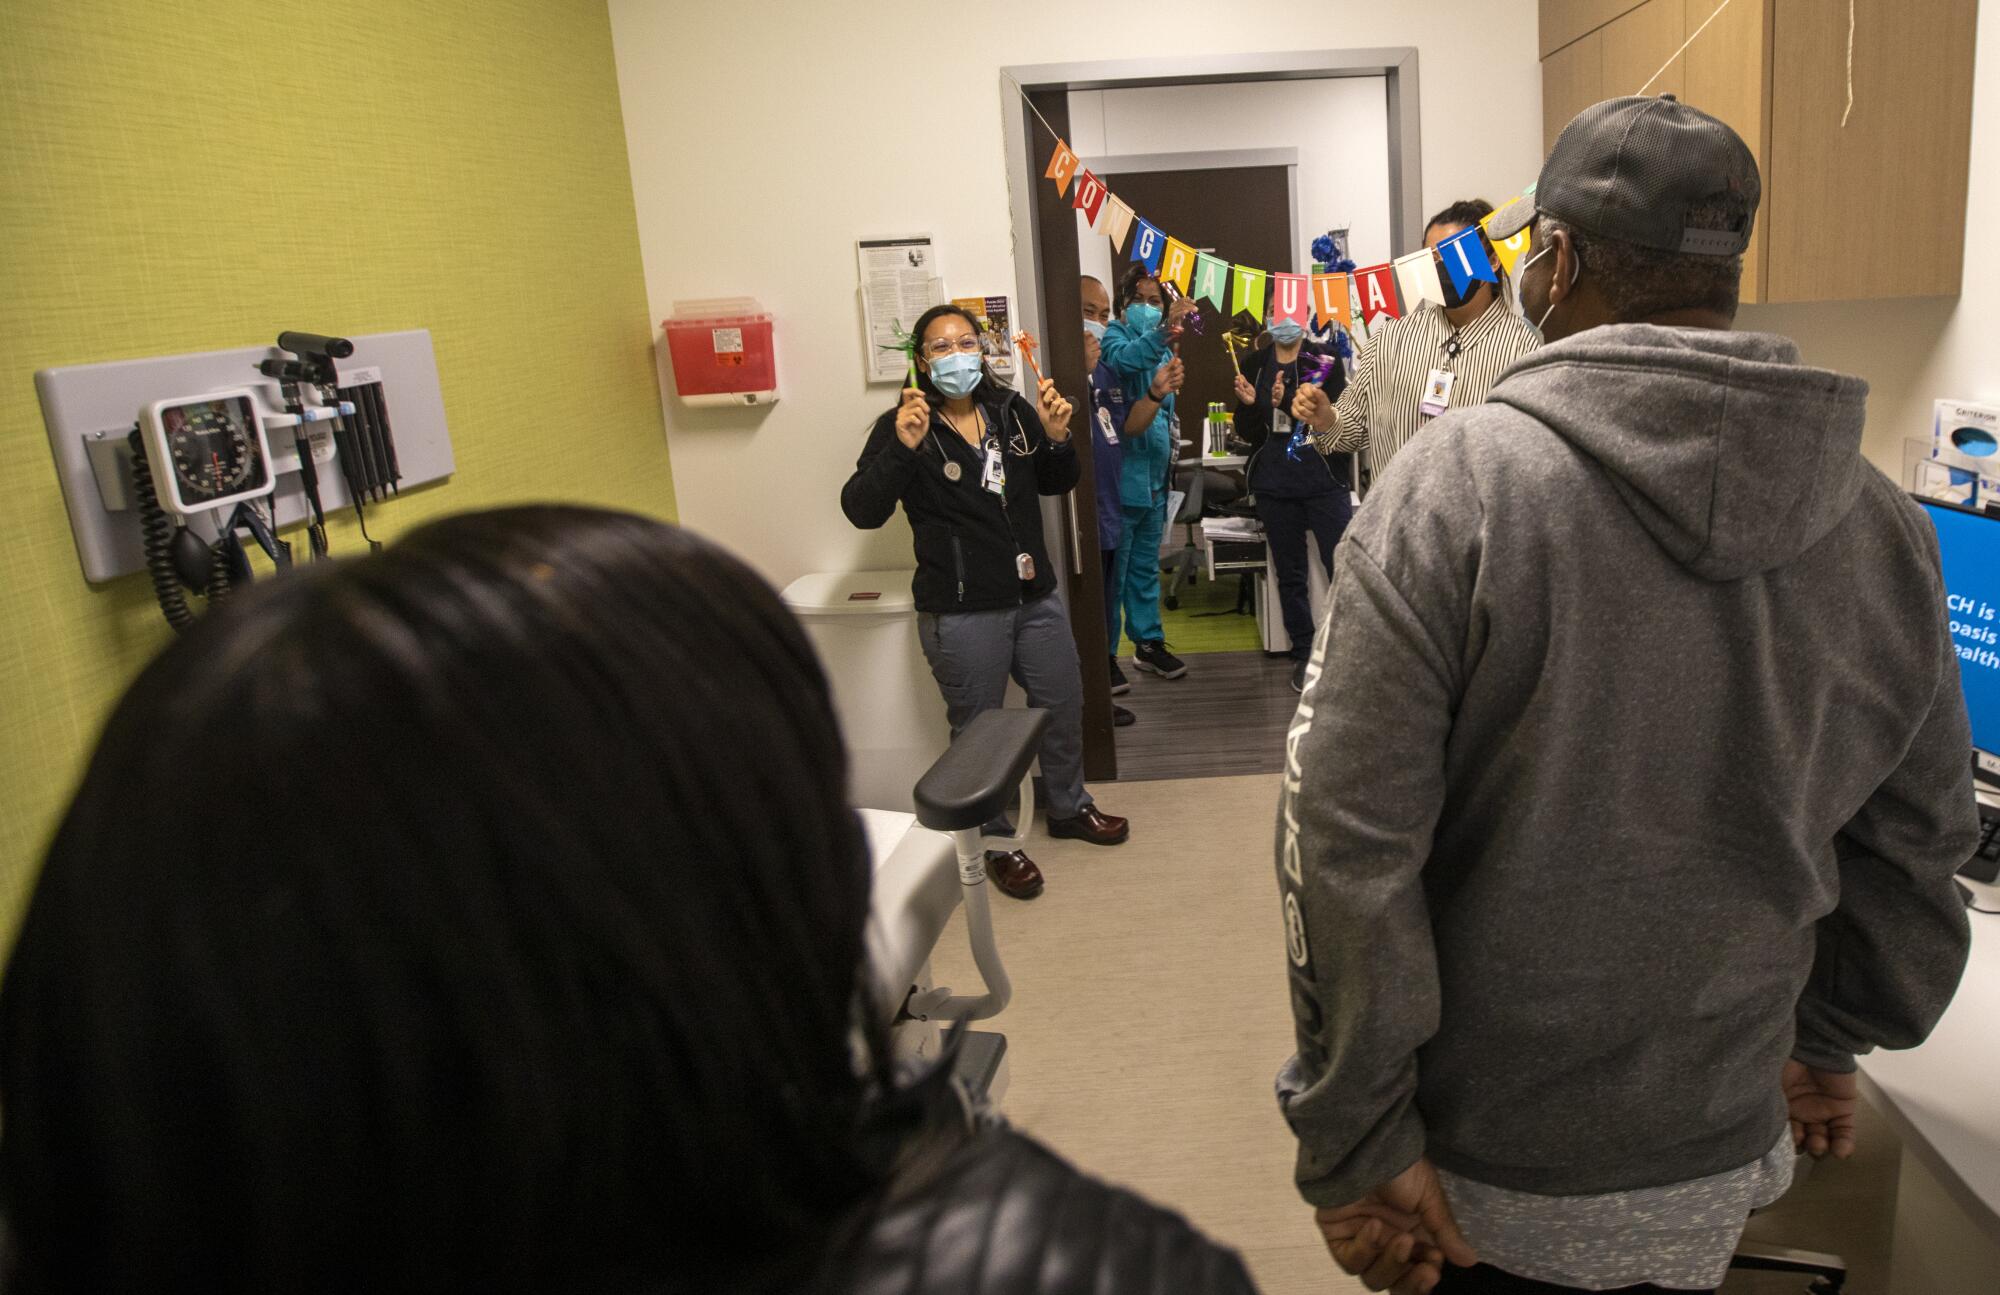 Richard and Audrey Perry walk into a clinic to a warm reception.